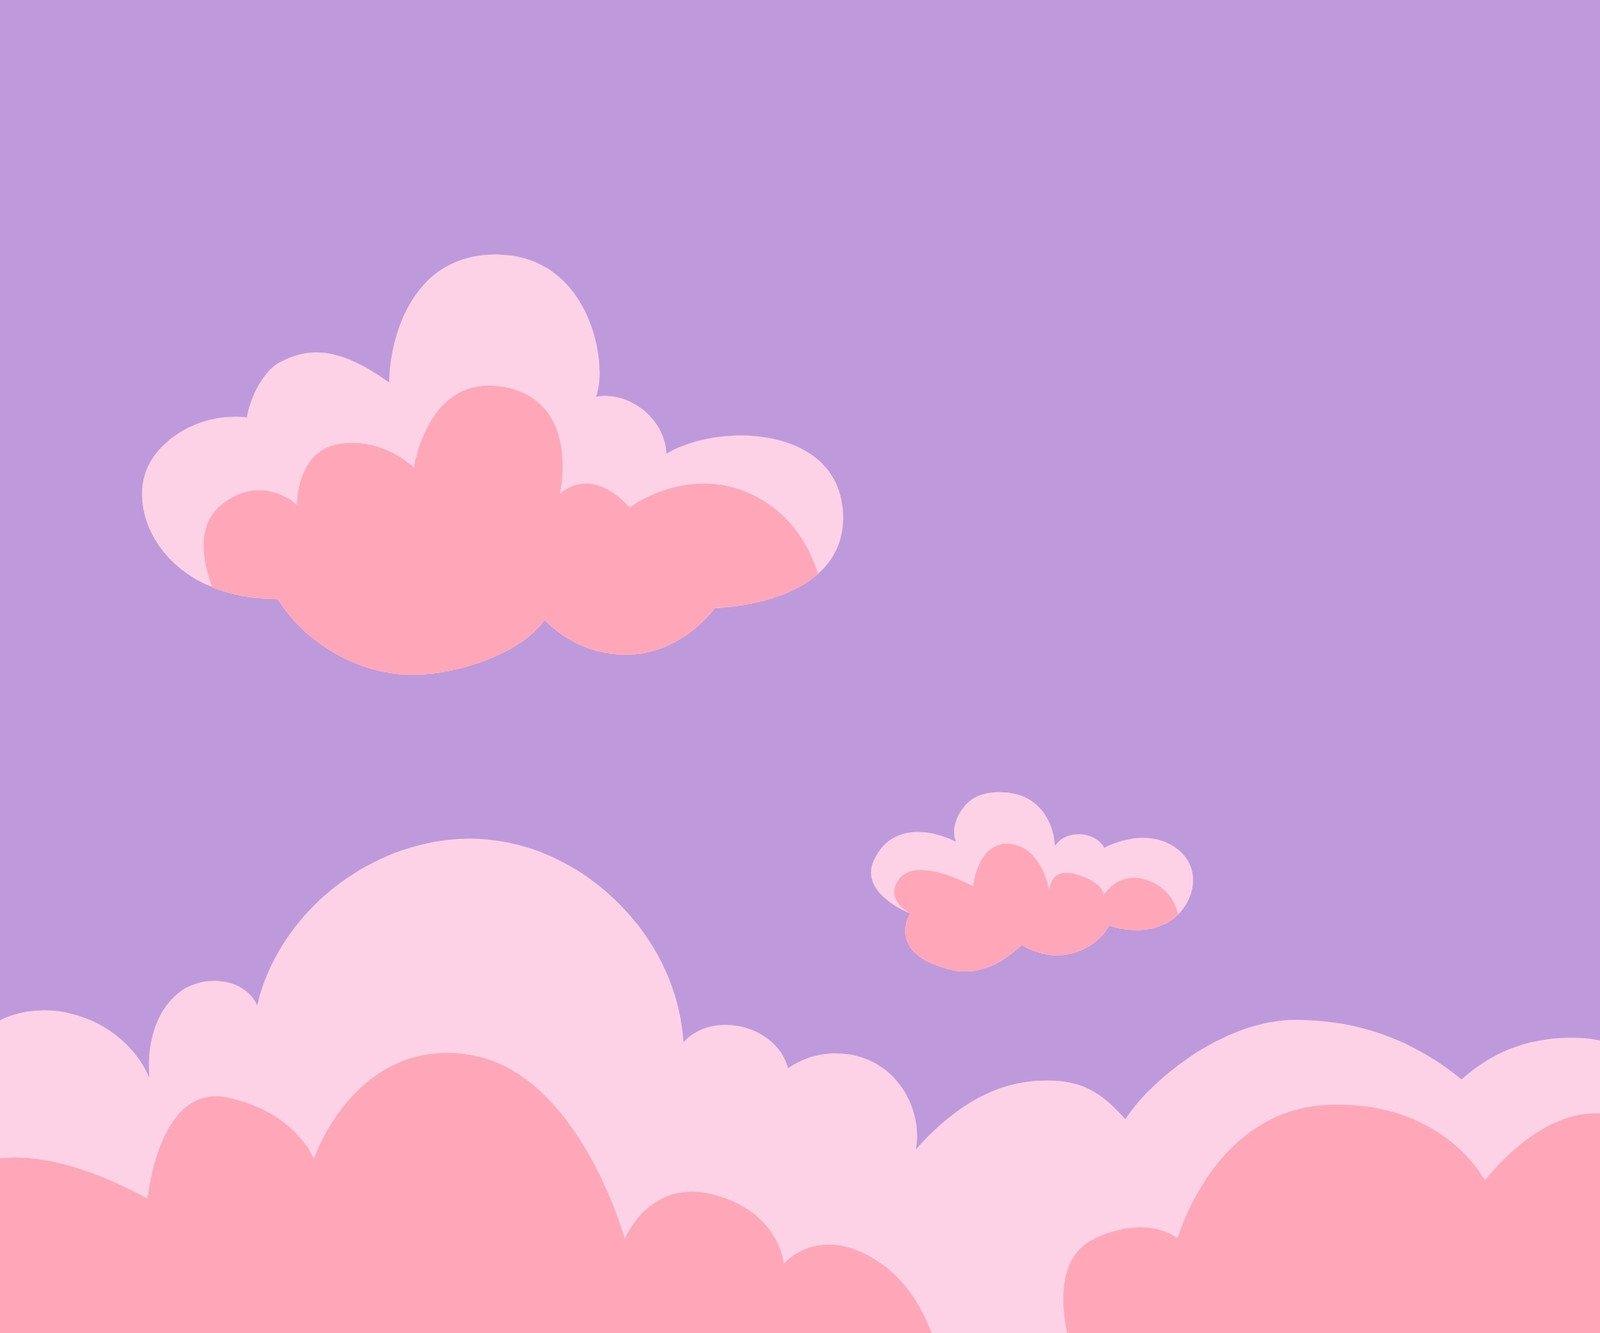 Aesthetic Blue and Pink Sky/Cloud Design | Essential T-Shirt